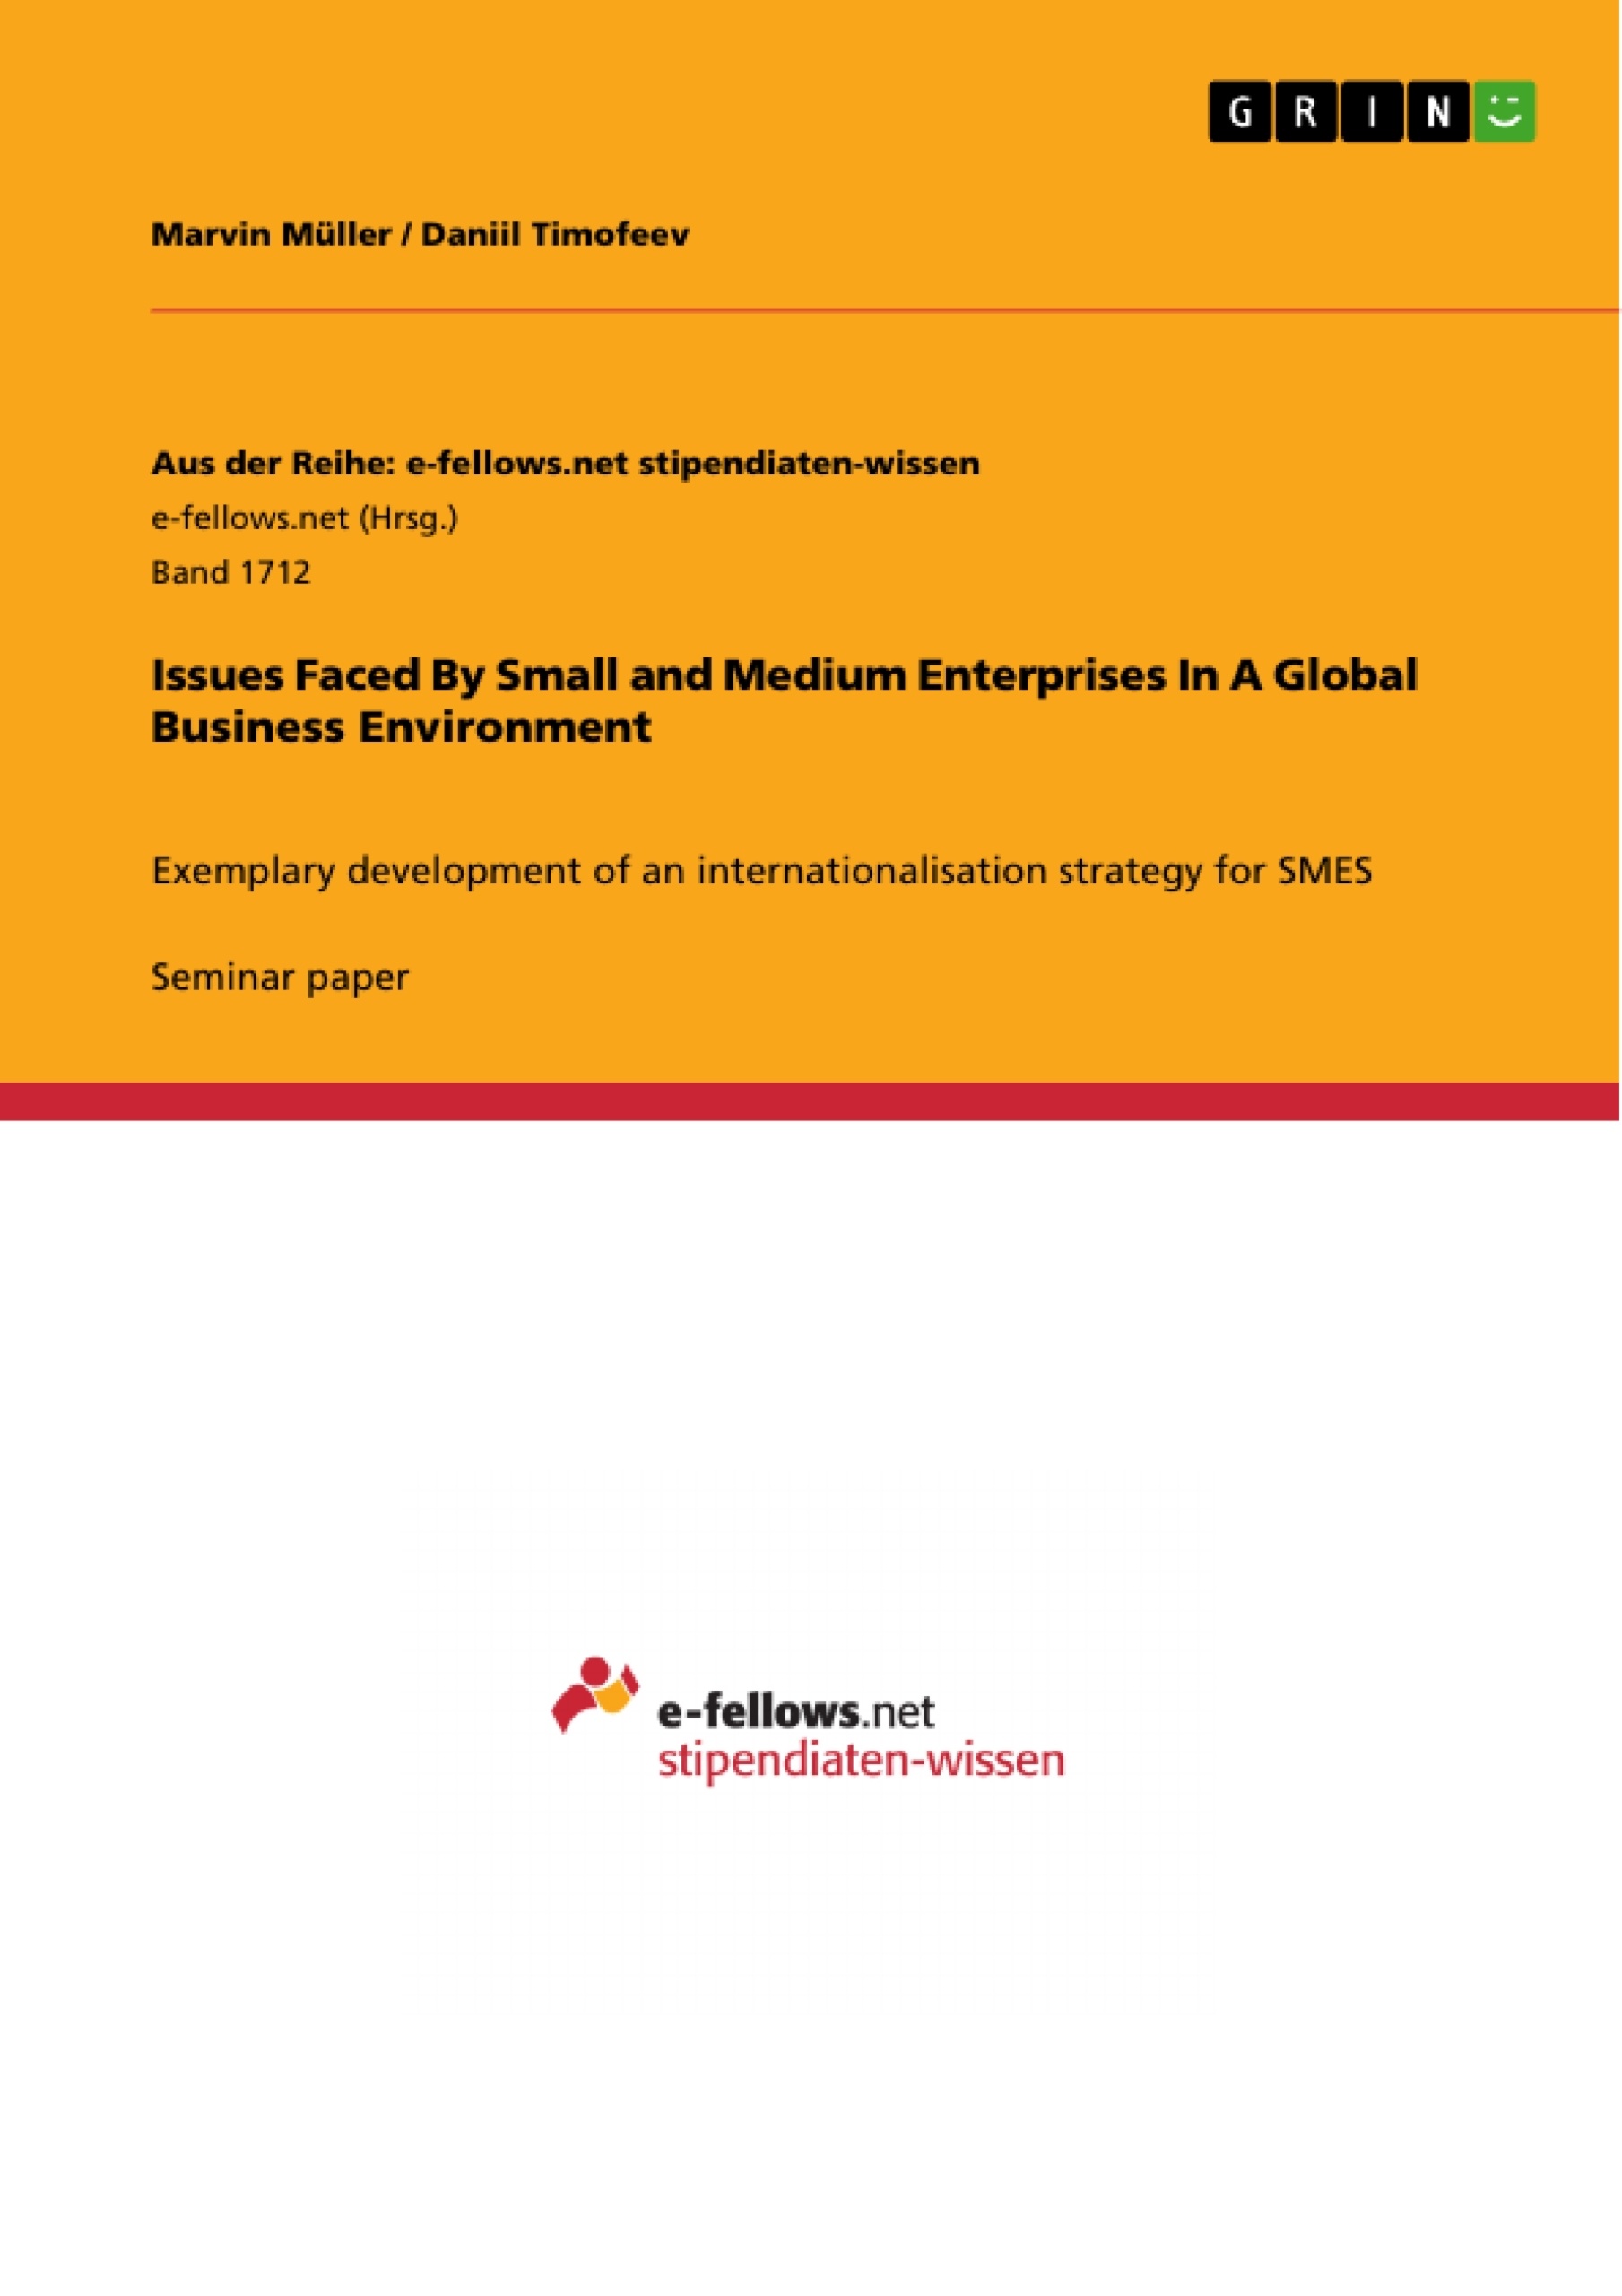 Title: Issues Faced By Small and Medium Enterprises In A Global Business Environment